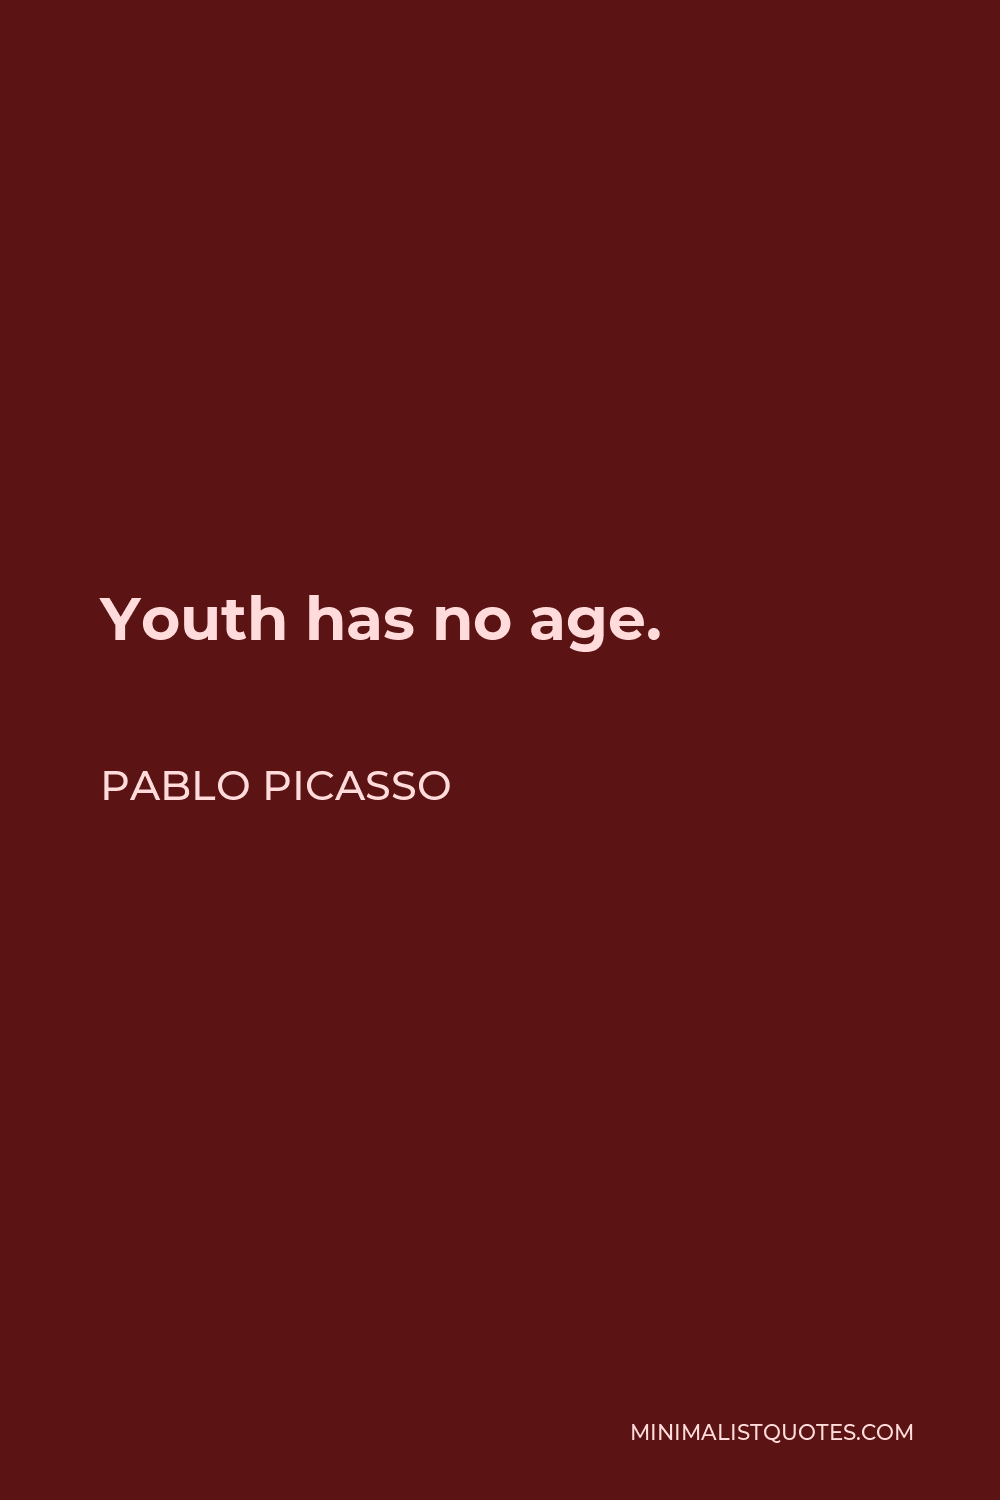 Pablo Picasso Quote - Youth has no age.